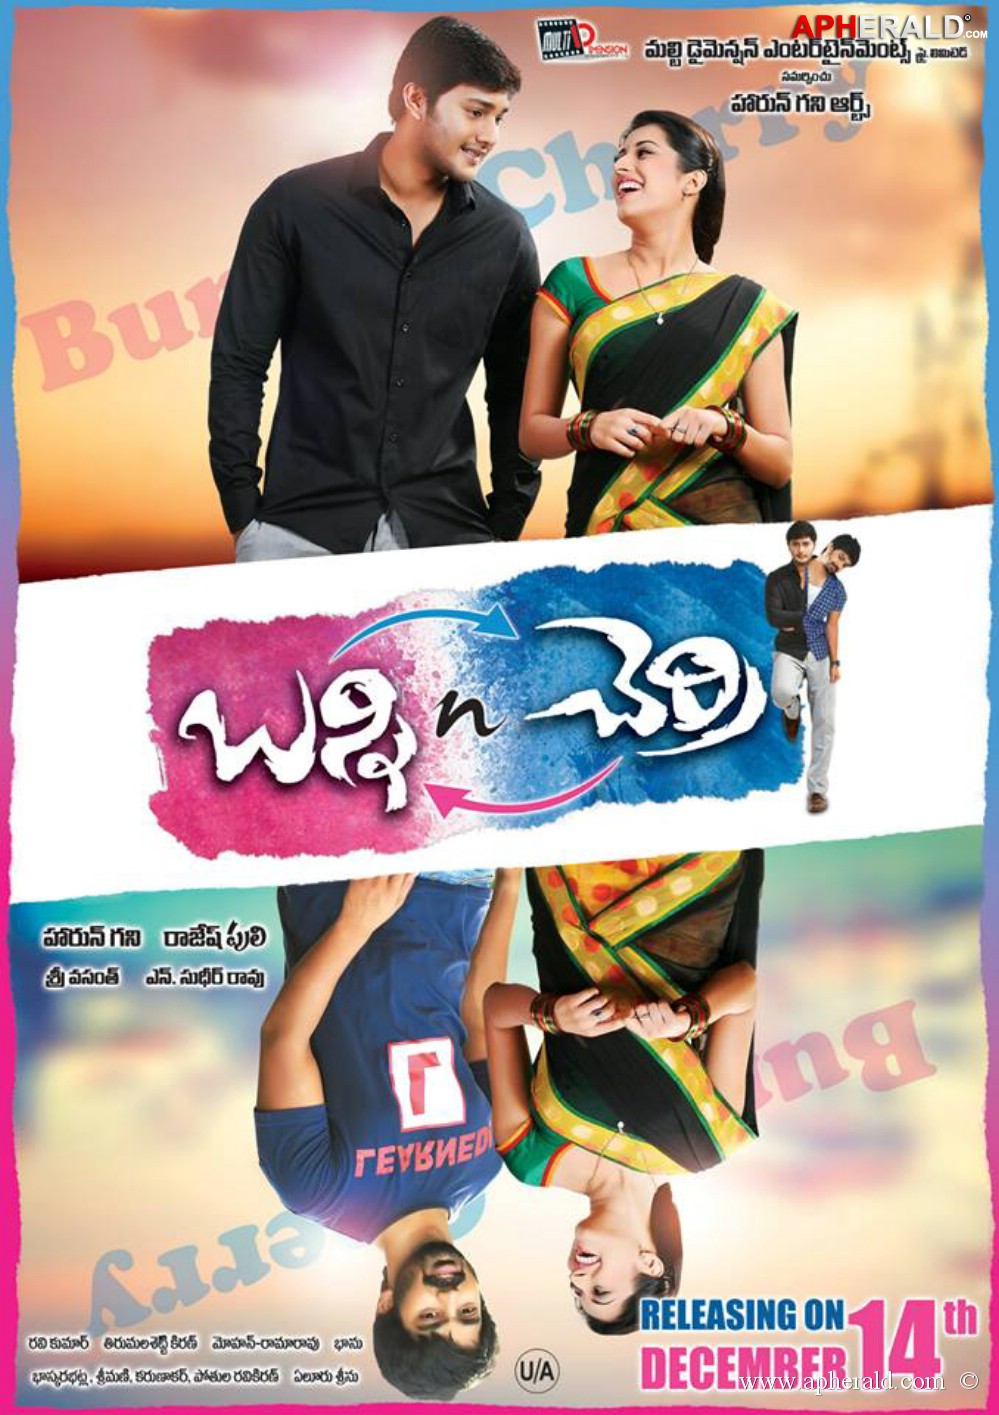 Bunny N Cherry Release date Posters 